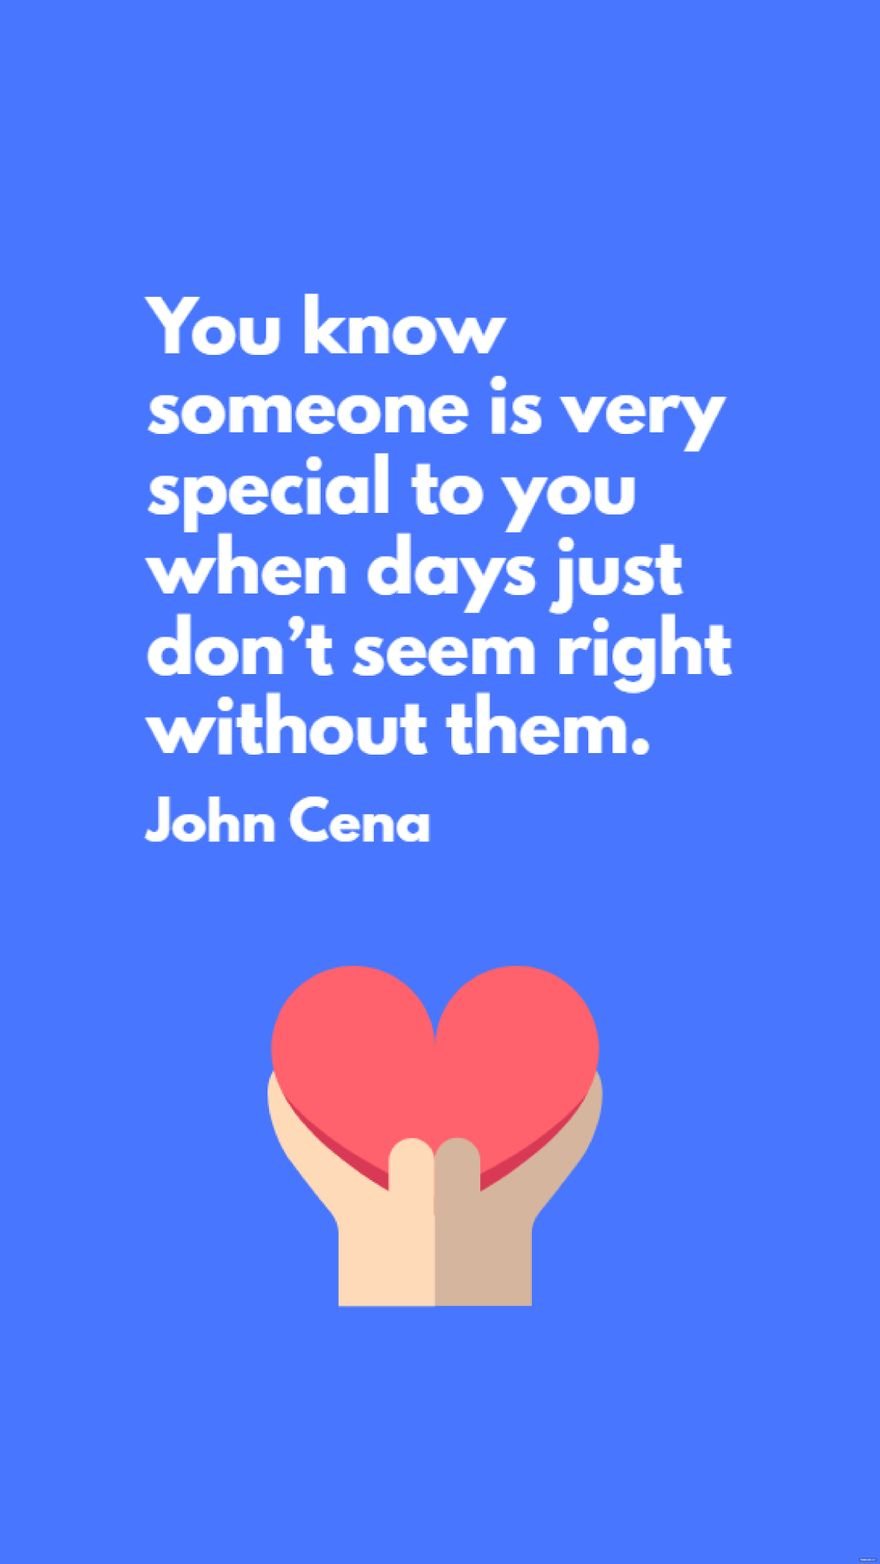  John Cena - You know someone is very special to you when days just don’t seem right without them.